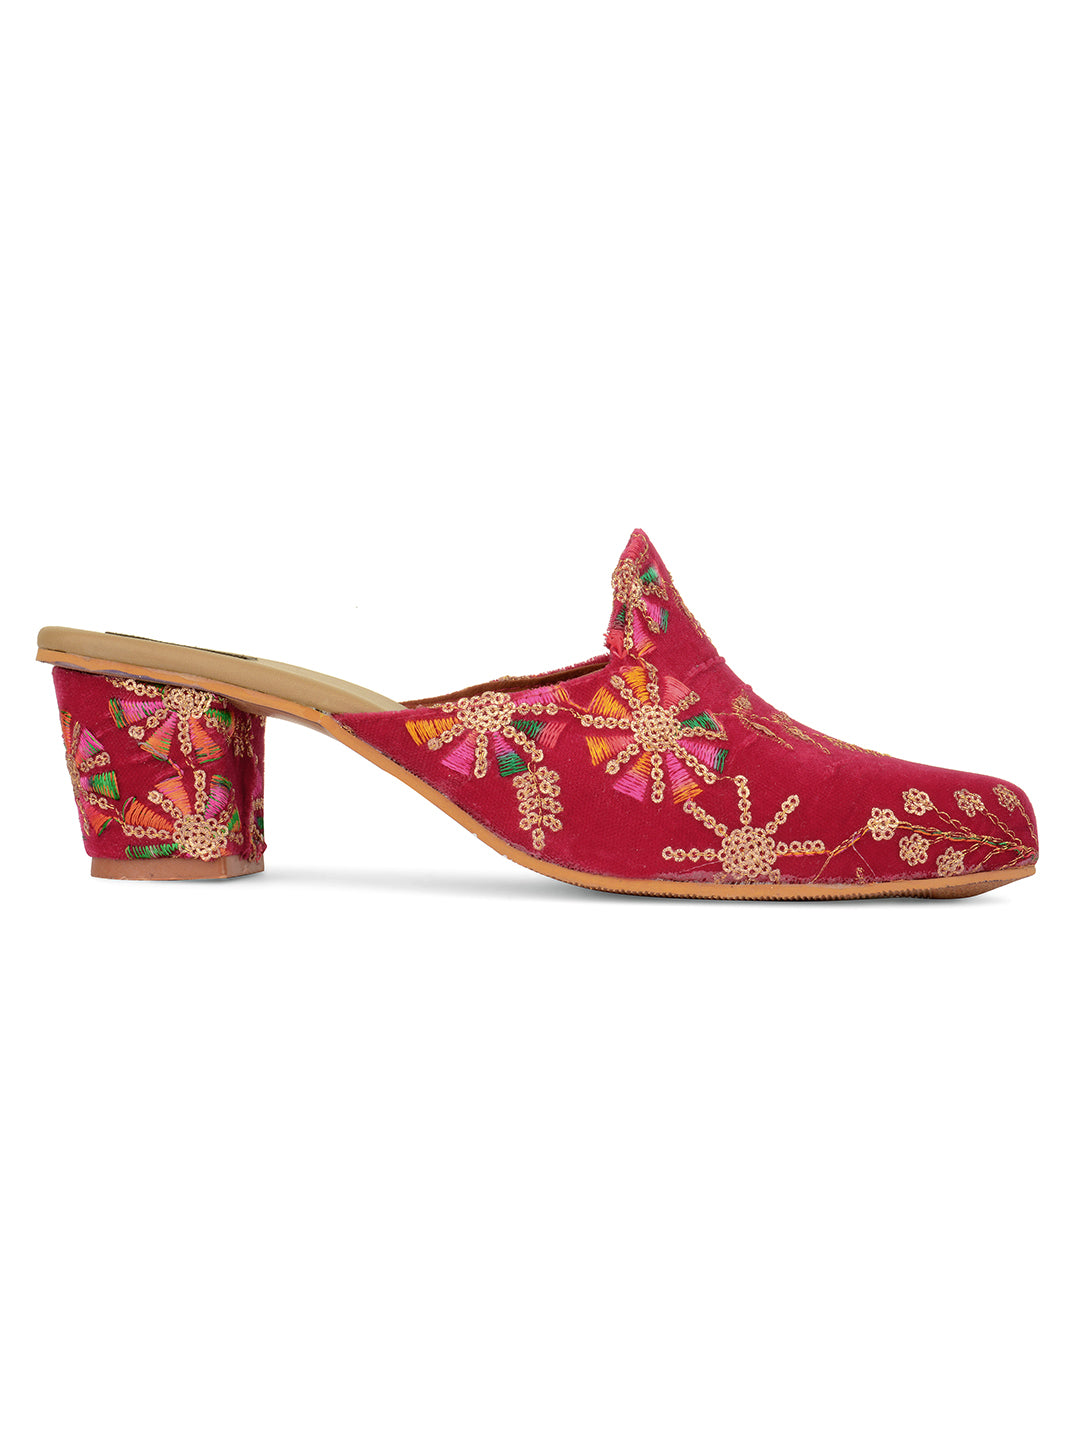 DESI COLOUR Pink Ethnic Block Mules with Tassels